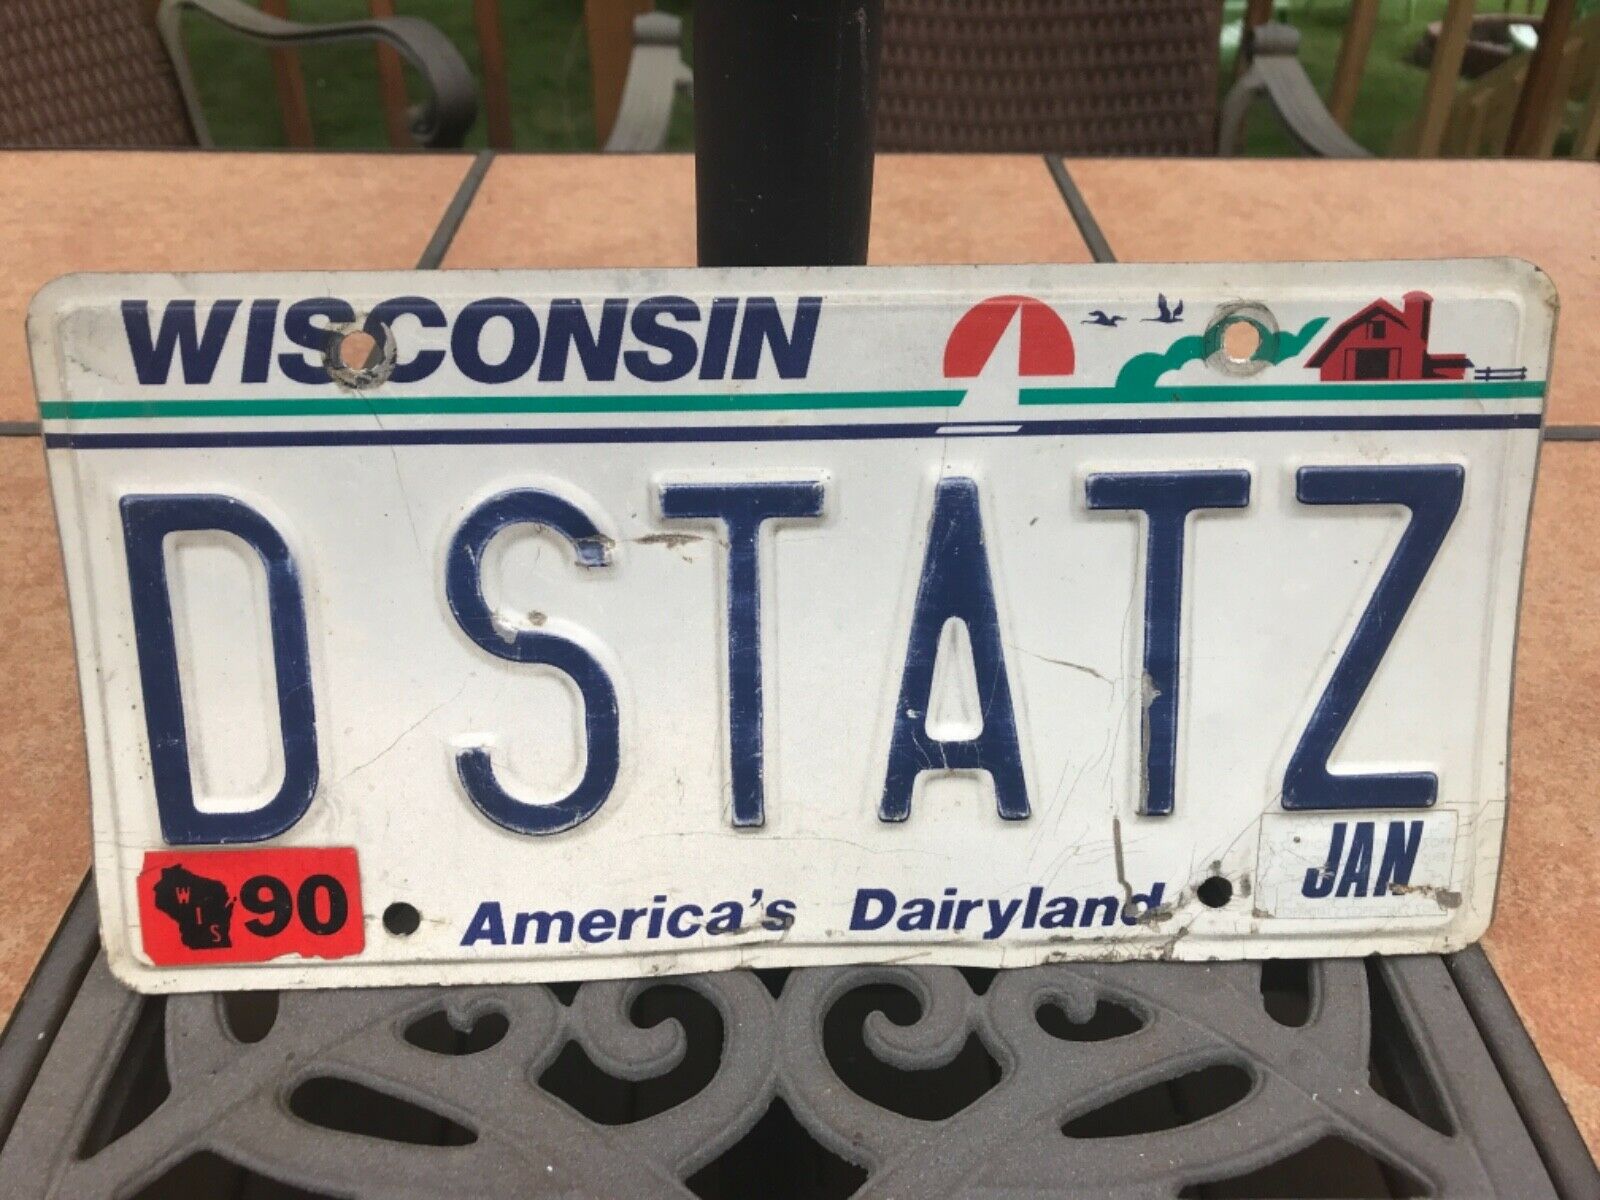 Wisconsin Personalized  Car  License Plate Tag: D Statz